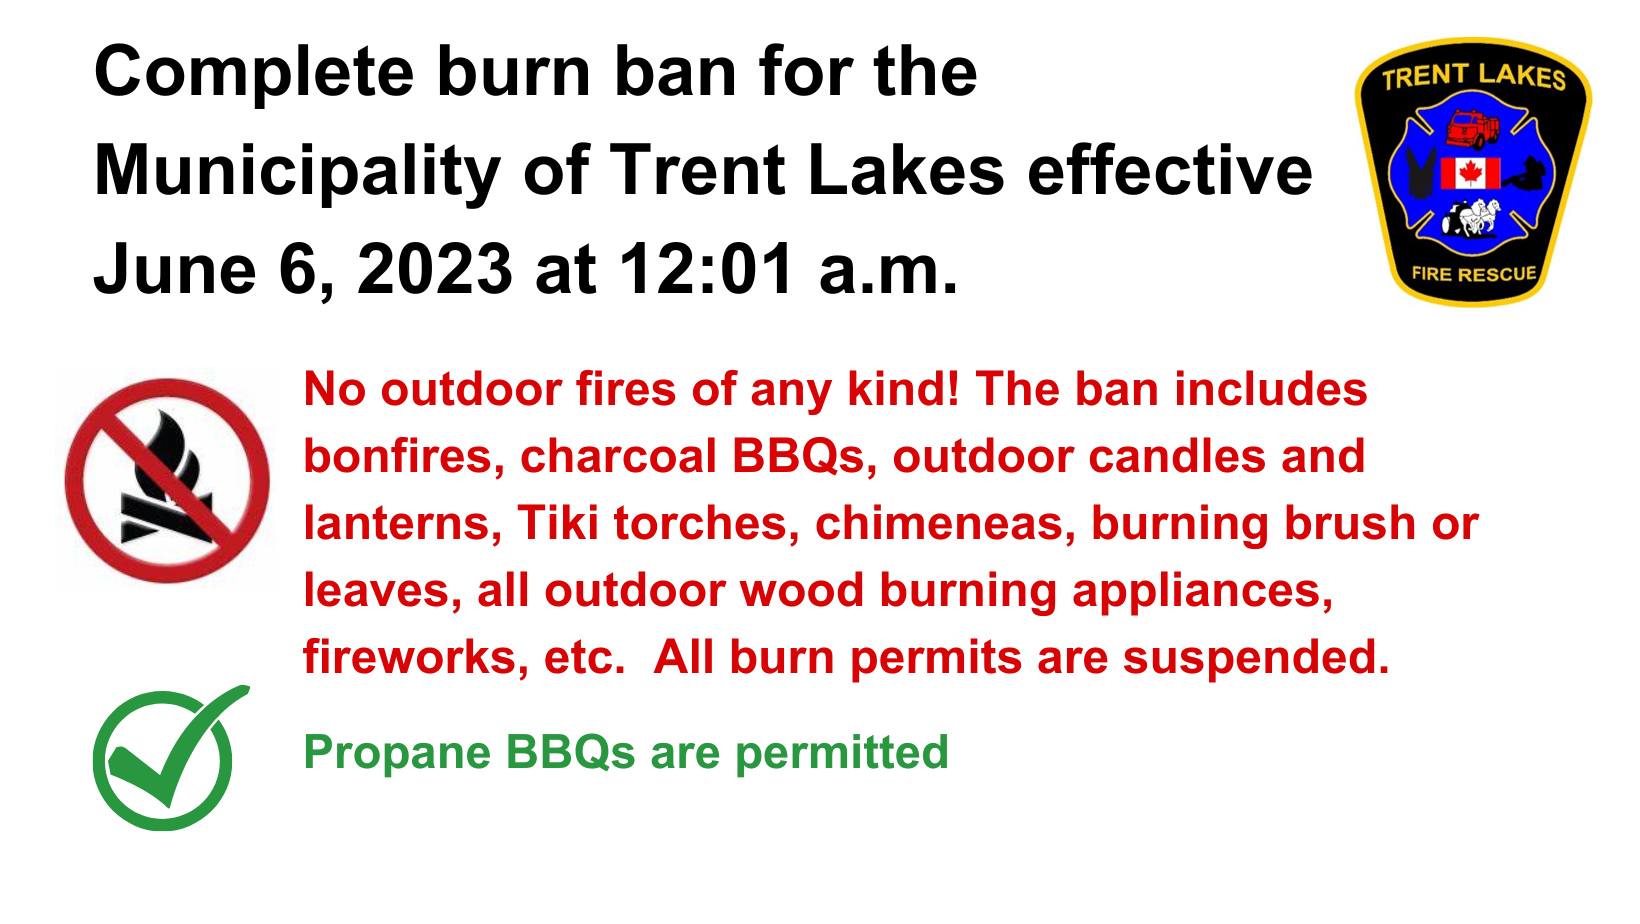 Burn Ban in effect for Trent Lakes as of June 6, 2023. All burn permits are currently suspended.